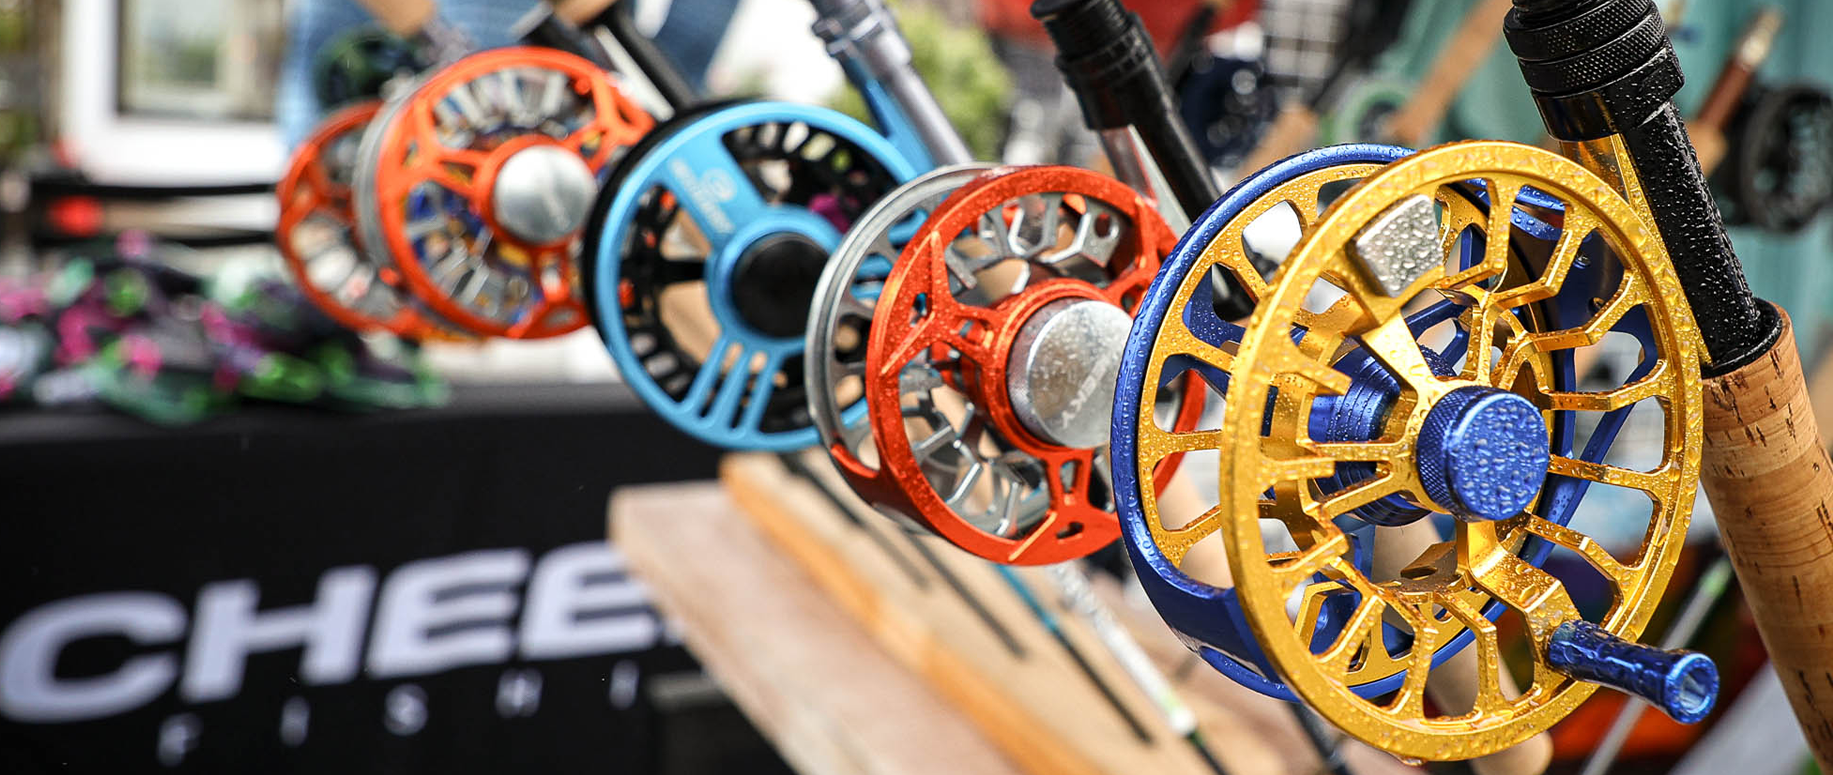 Cheeky Fly Reel Lineup of Spray and Launch Fly Reels on Display